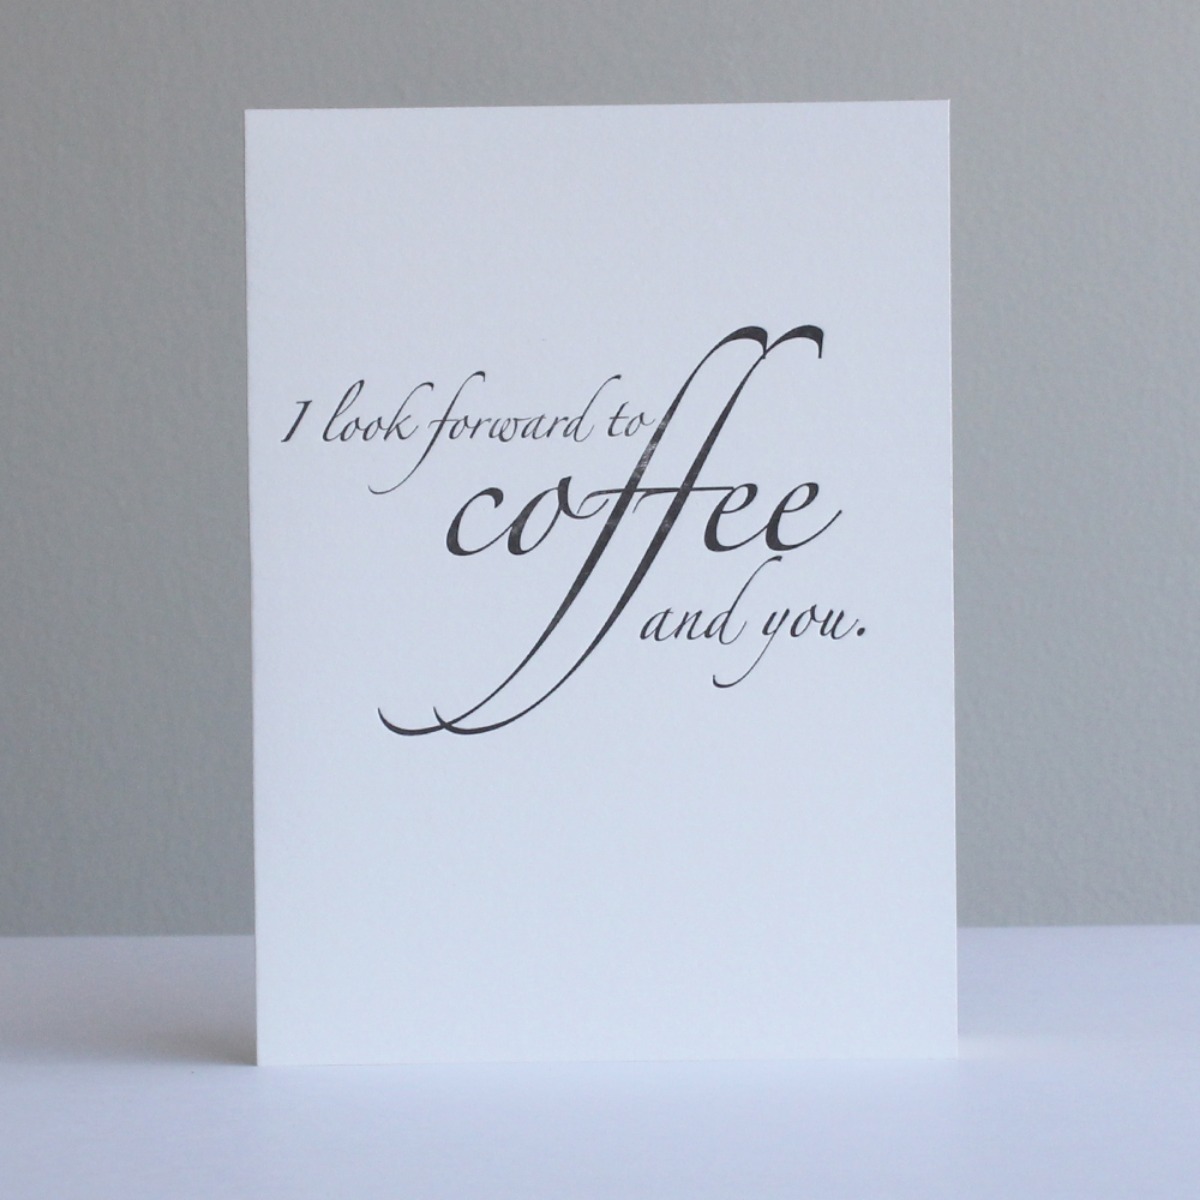 Letterpress card_21_Coffee and you